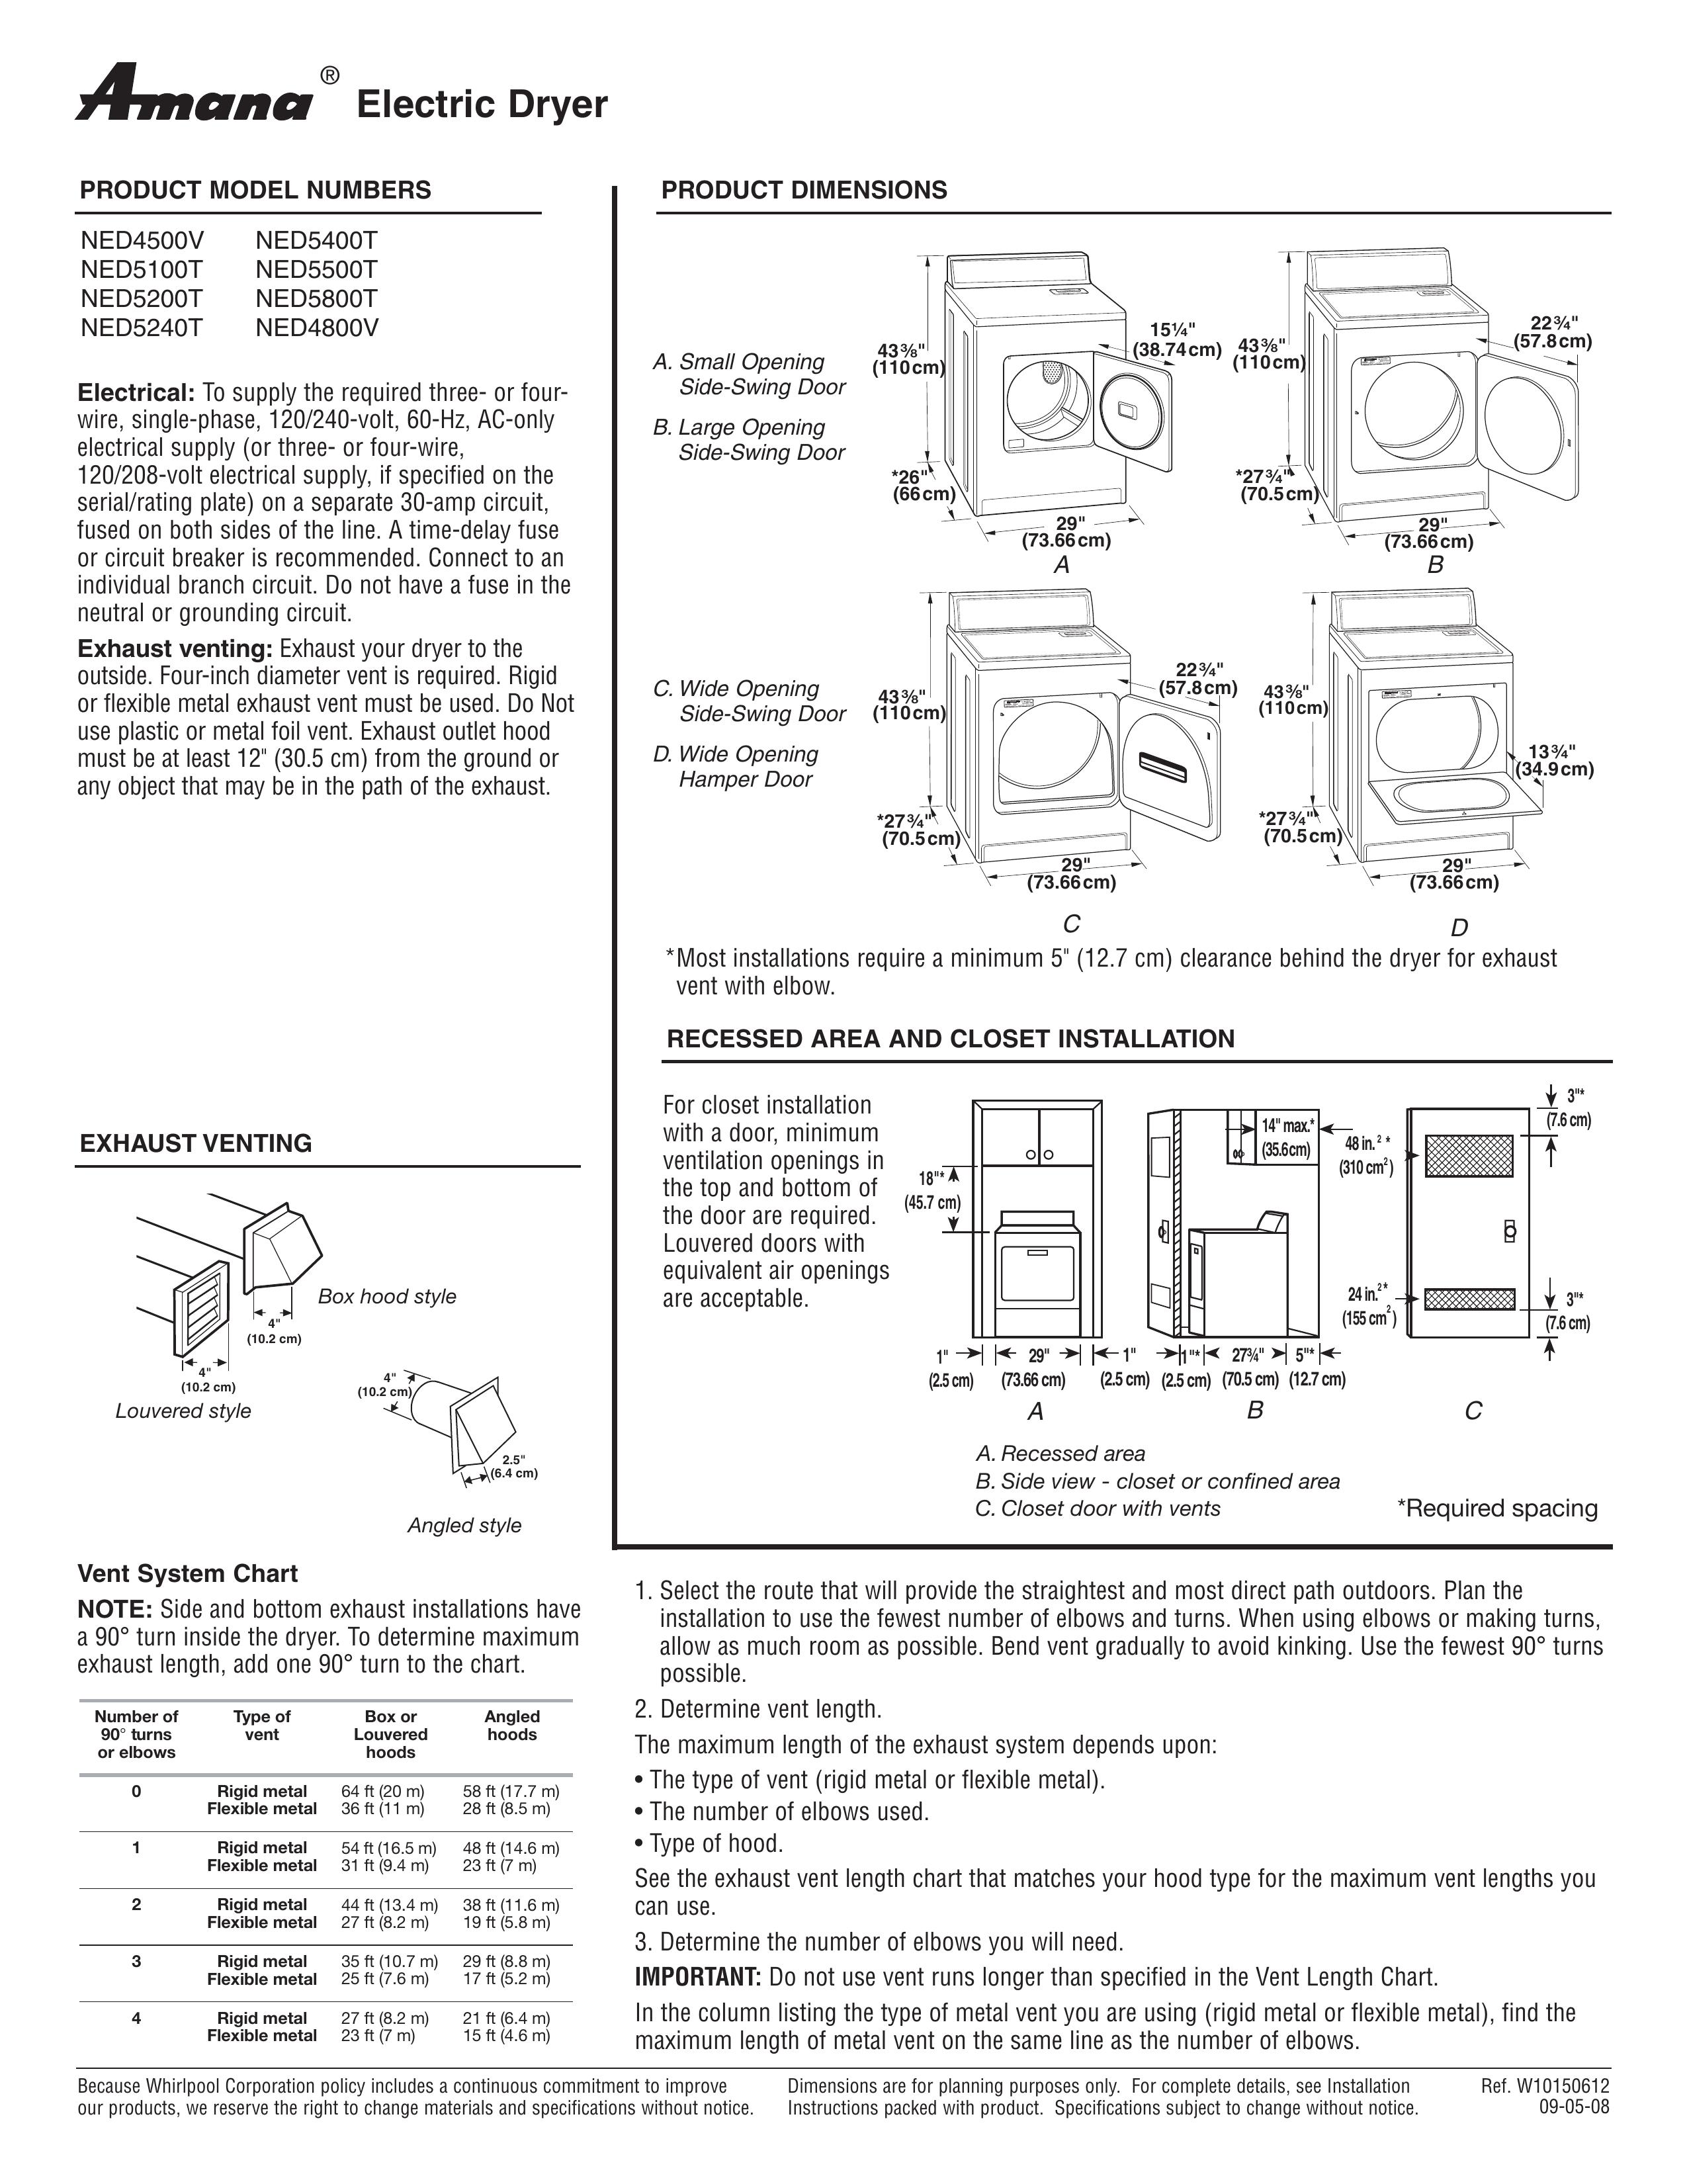 Amana NED4800V Clothes Dryer User Manual